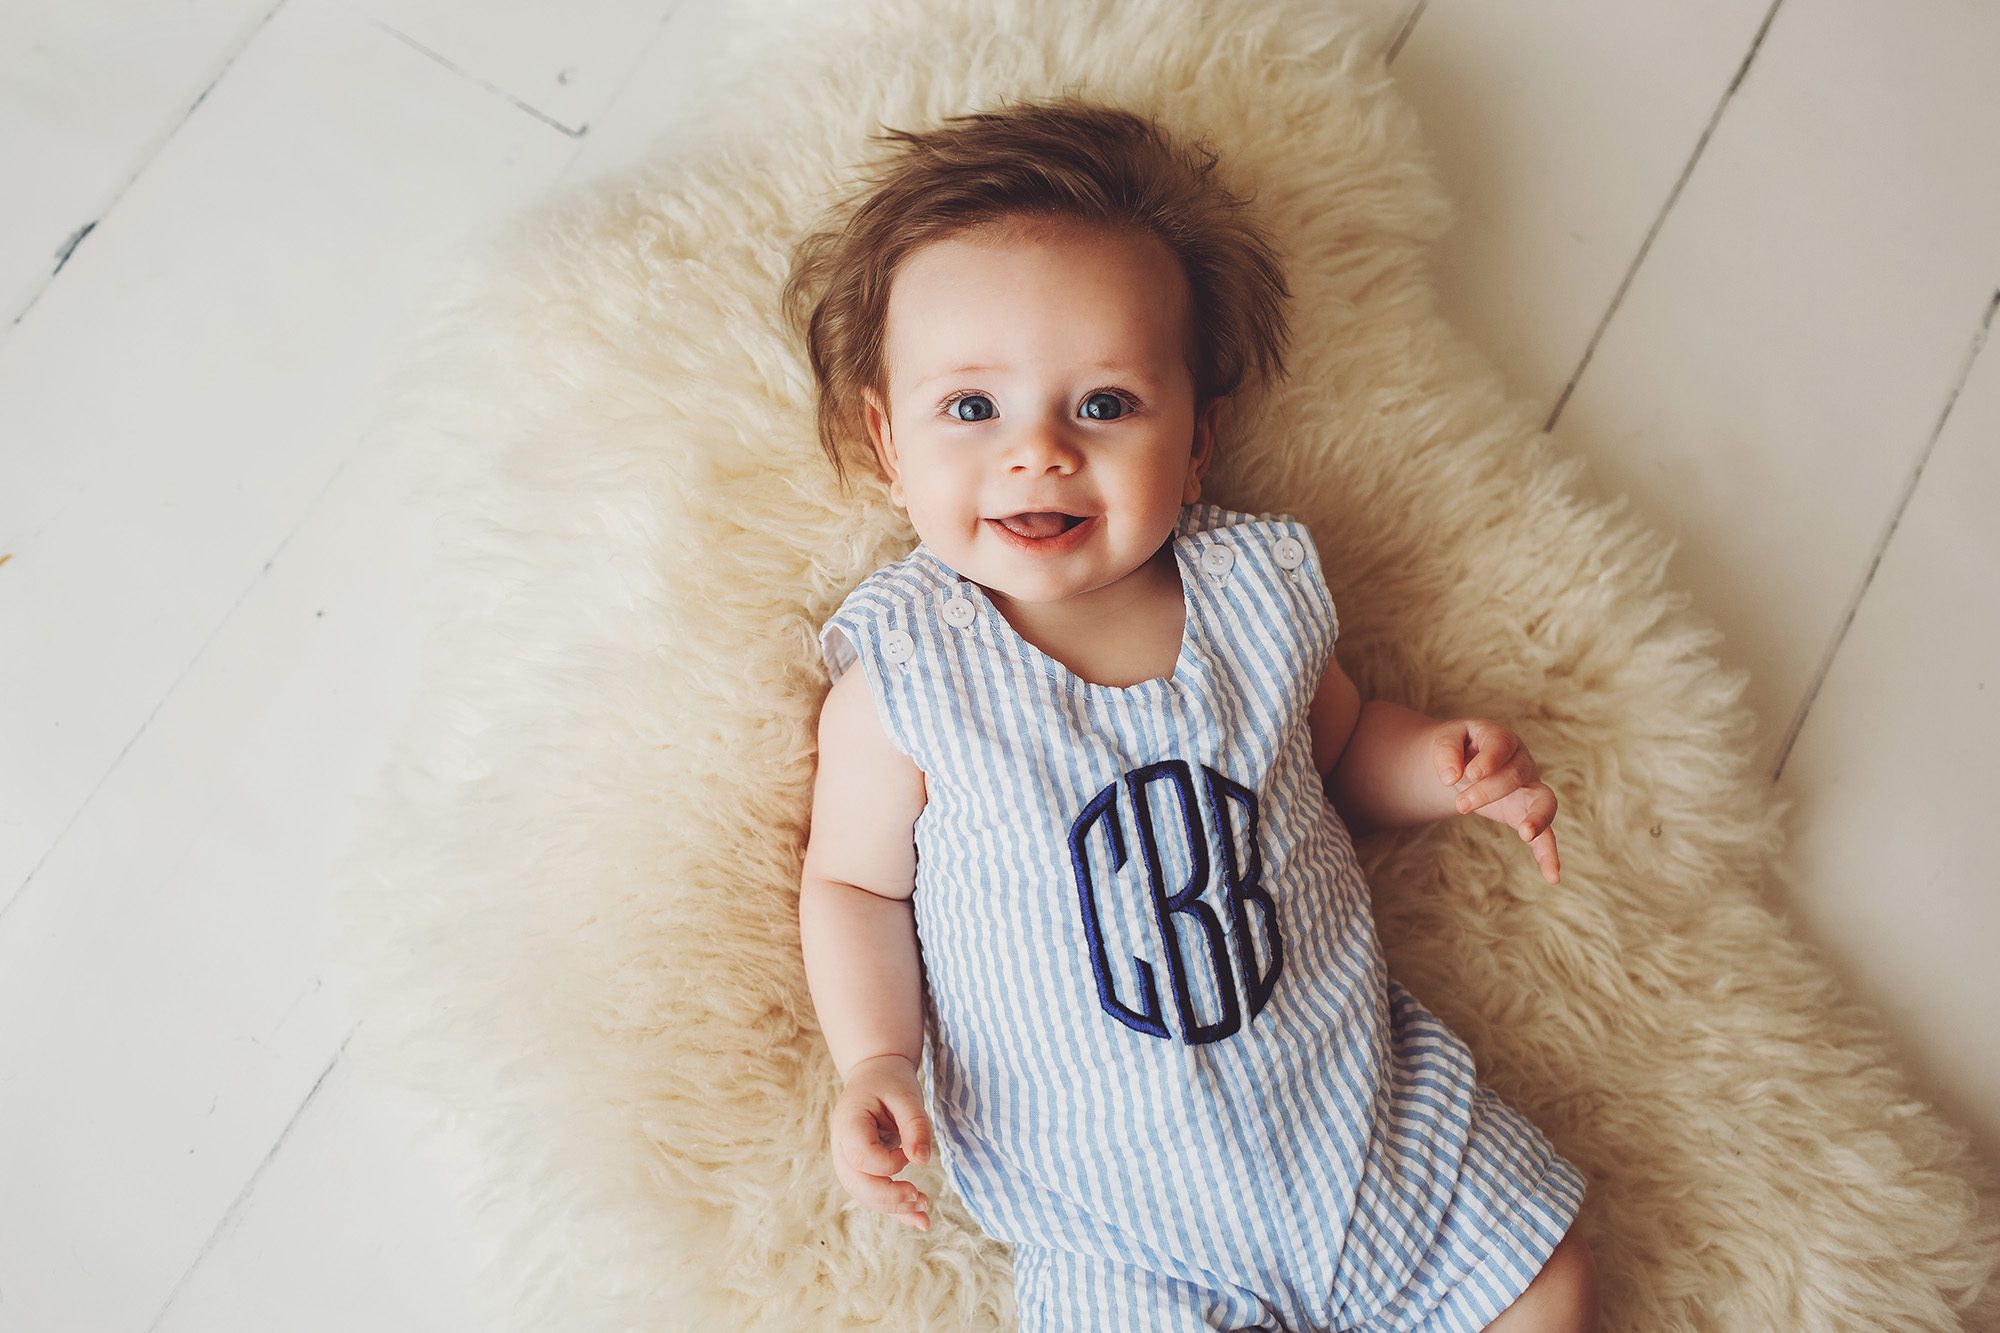 Carter with a great big grin in his monogrammed onesie